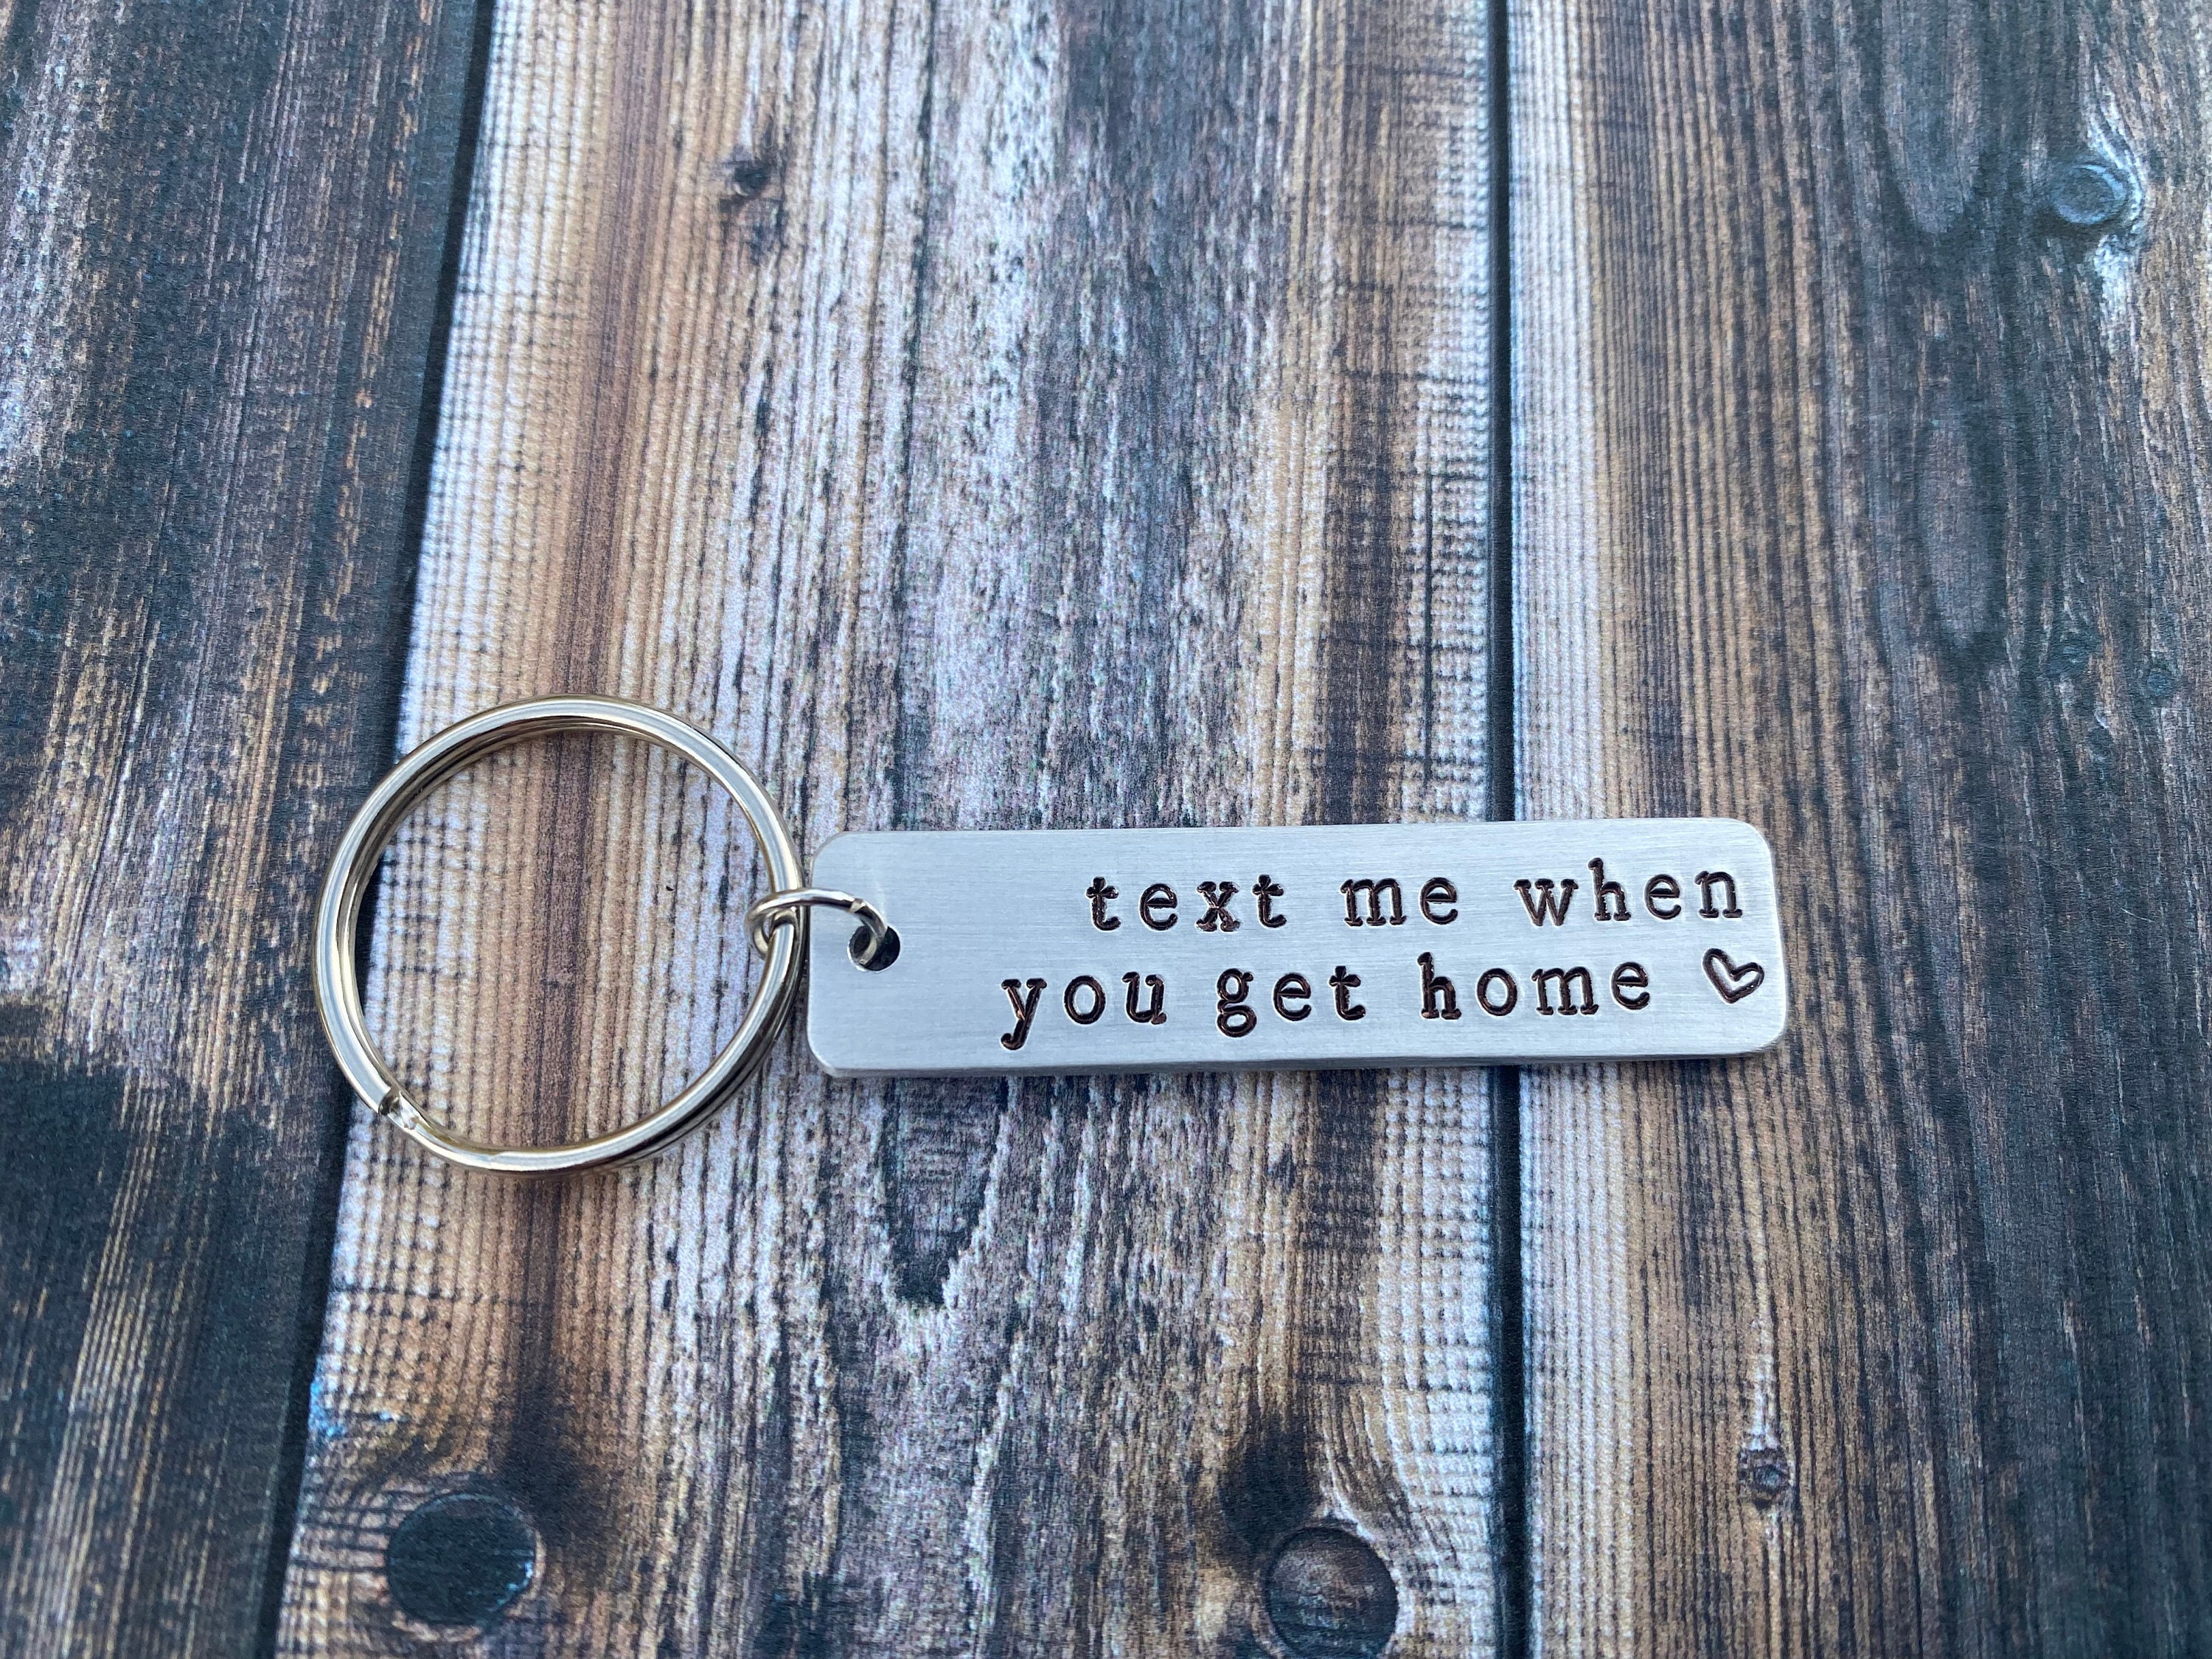 Wrapsify Engraved Keychain - Be Safe Always Come Home to Me - Gkc14038 Buy Keychain Only